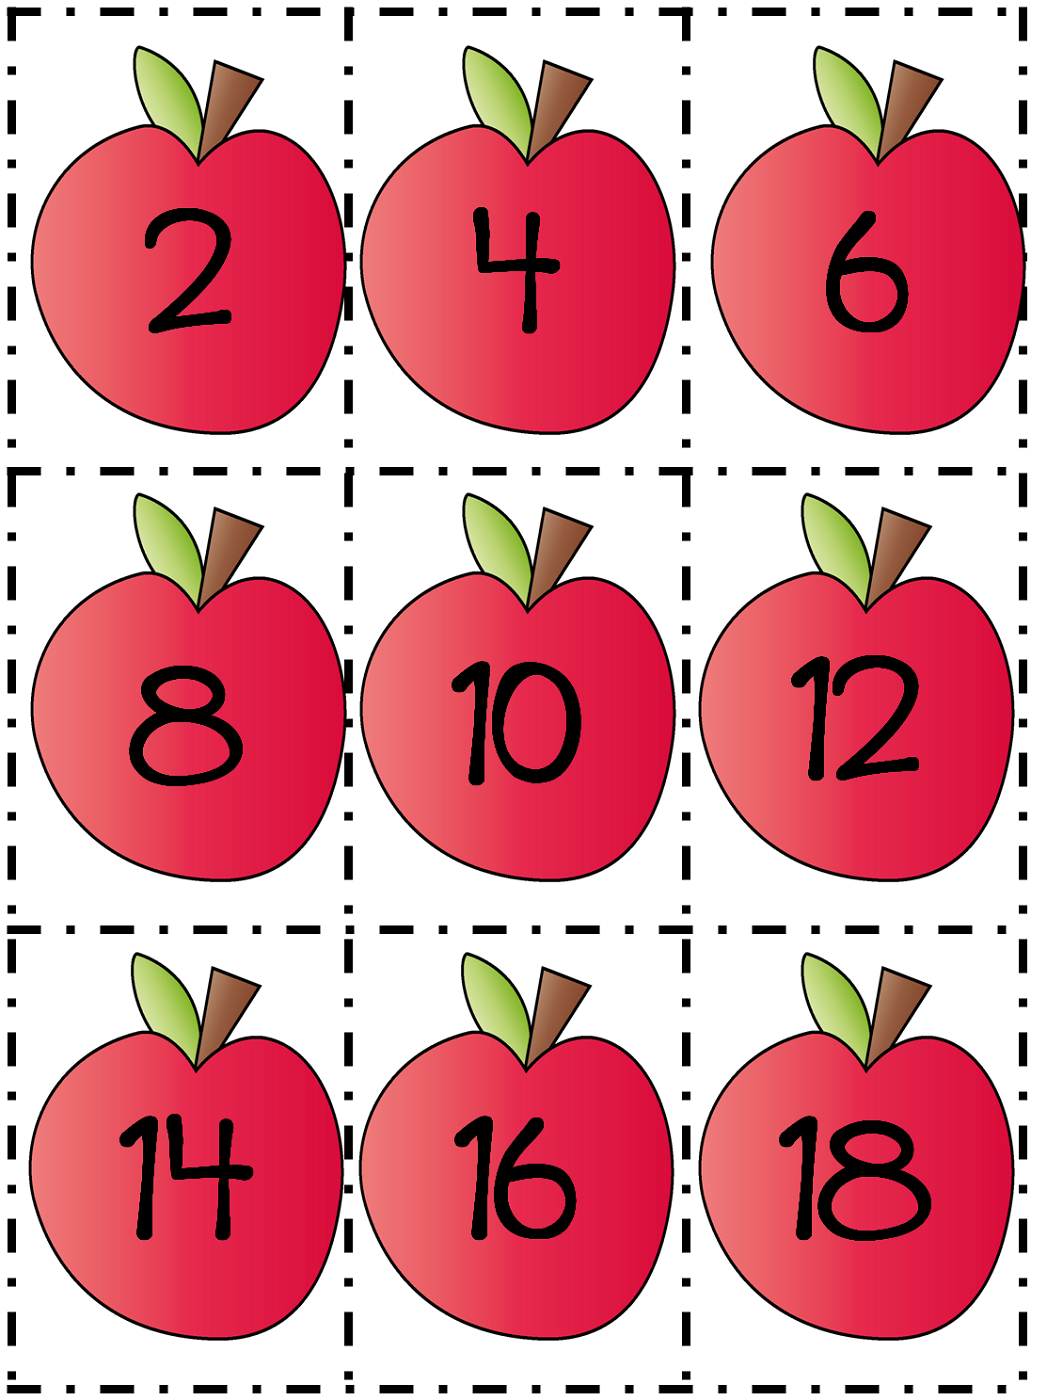 count by 2s worksheet apples